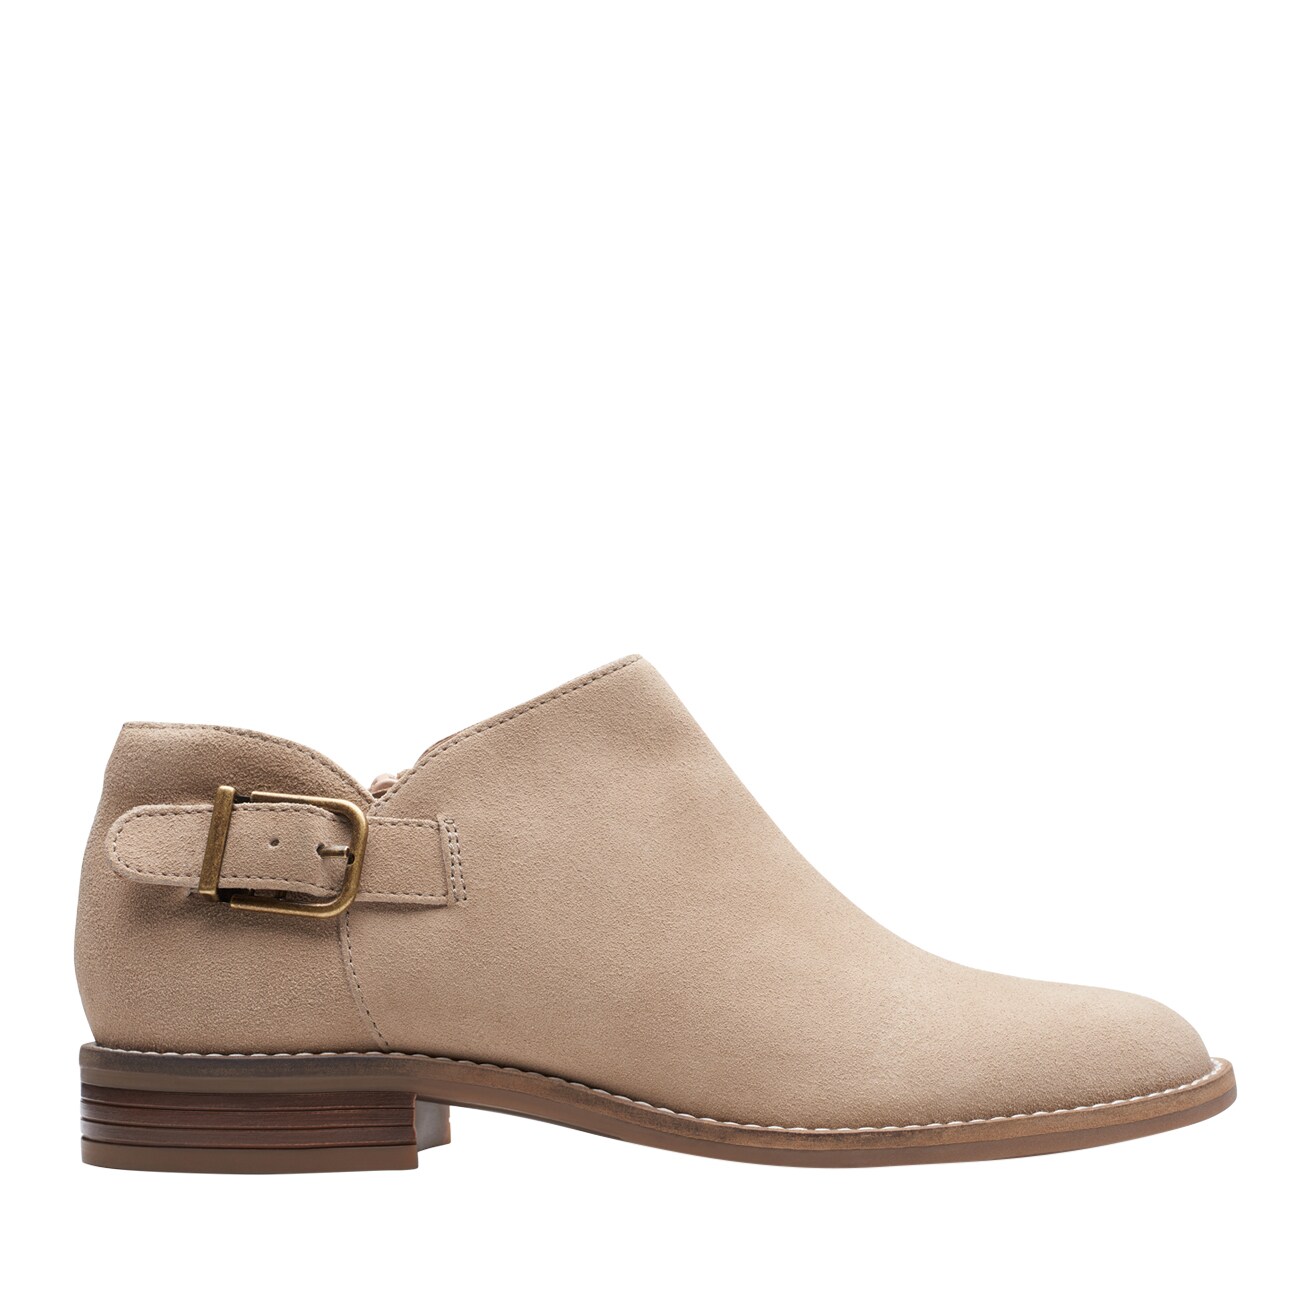 black friday clarks shoes